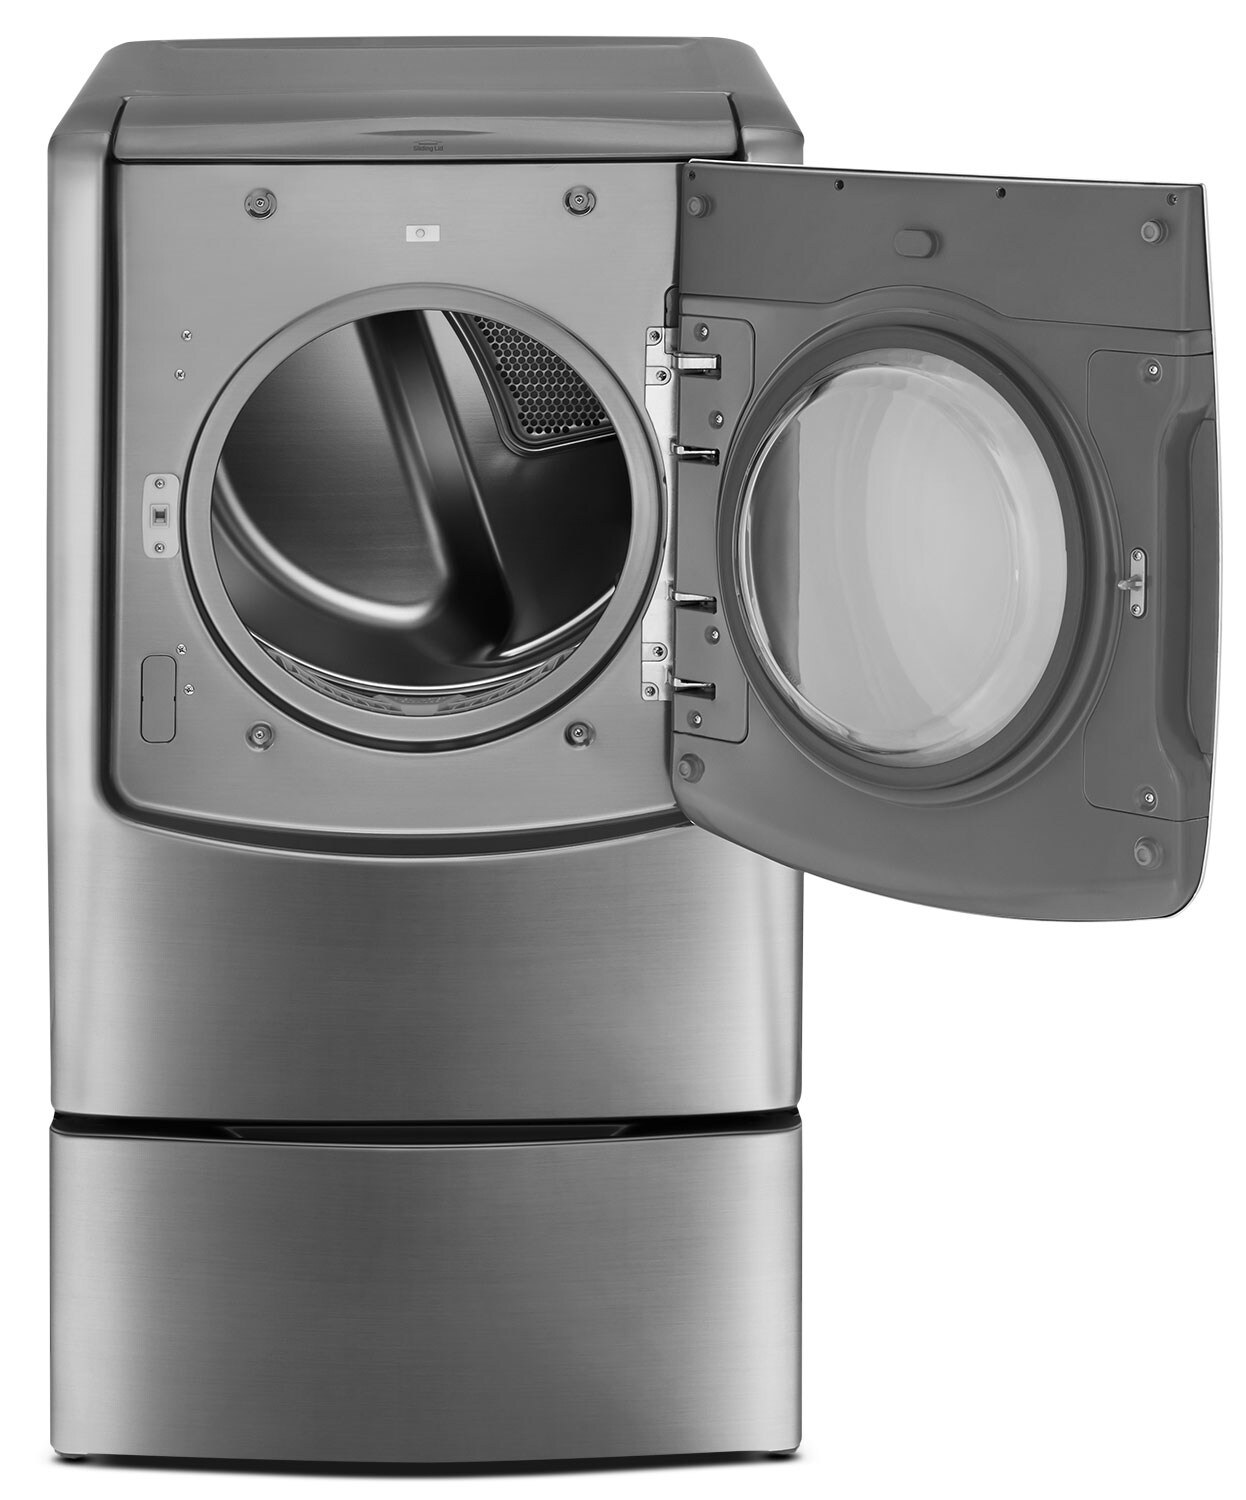 LG TWIN Wash™ 6.0 Cu. Ft. Washer, Pedestal Washer and 9.0 Cu. Ft. Electric Dryer Graphite